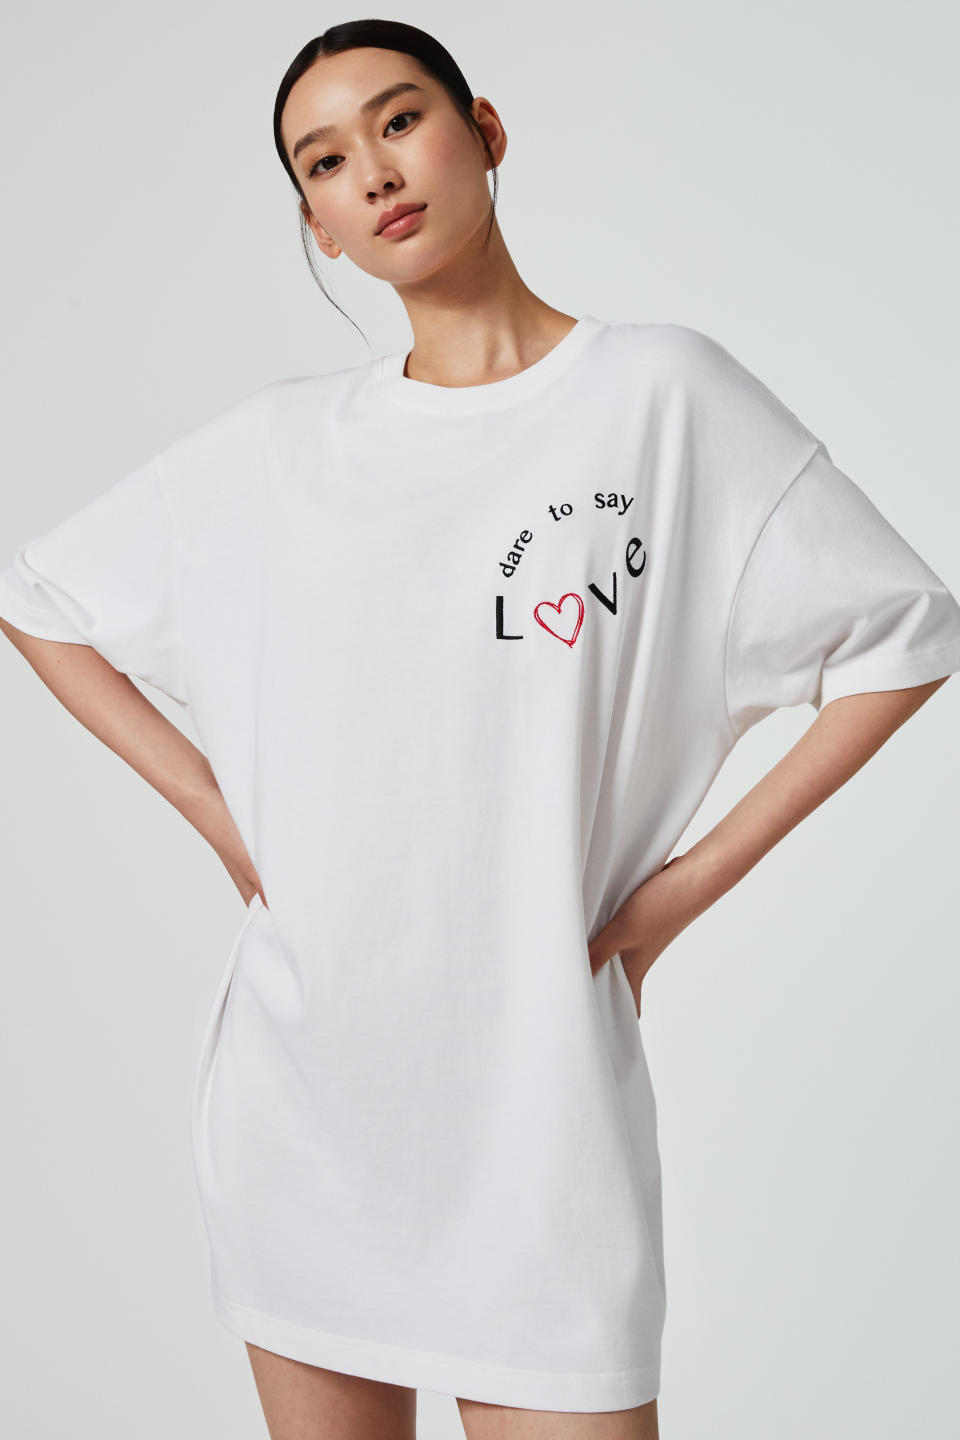 "Dare to say Love" logo T-shirt from the Victoria's Secret x Rui-Built collaboration.